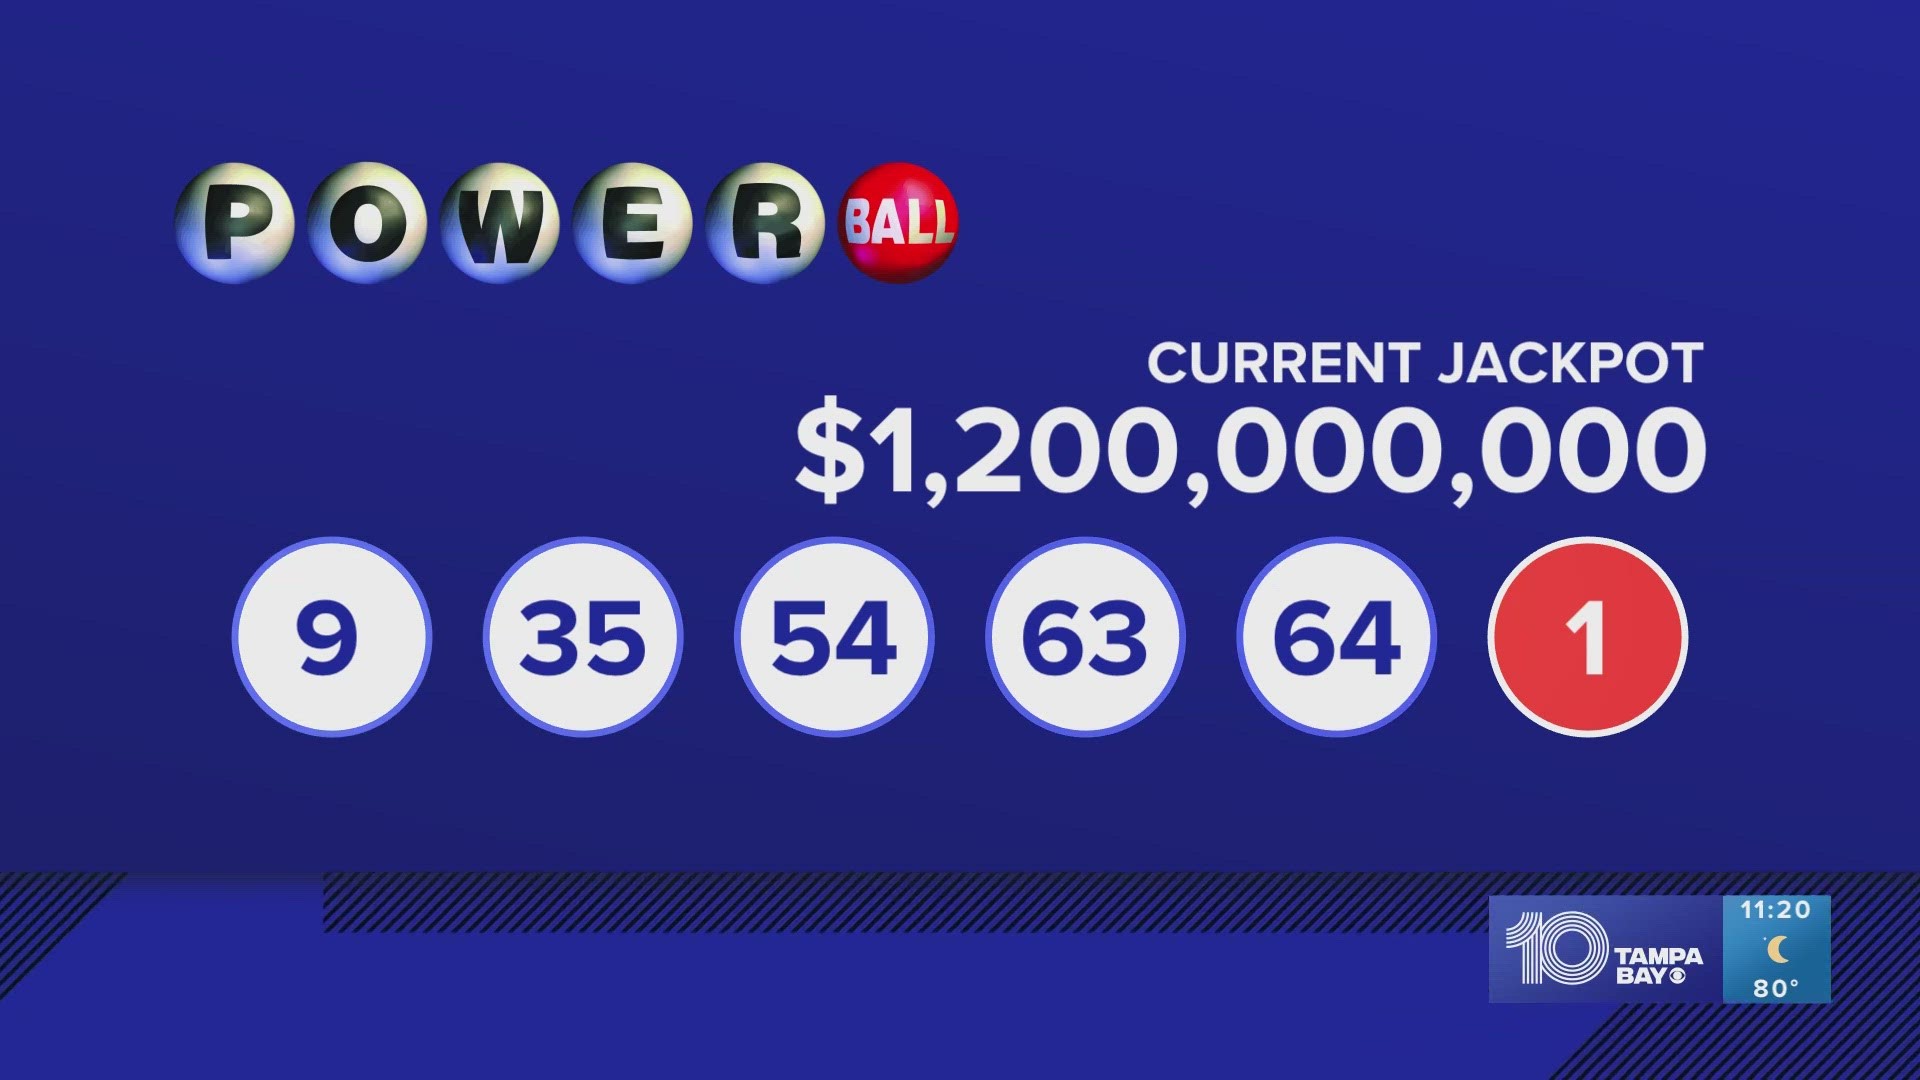 The last time someone hit the Powerball jackpot was back in July, when one very lucky lottery player won $1.08 billion.